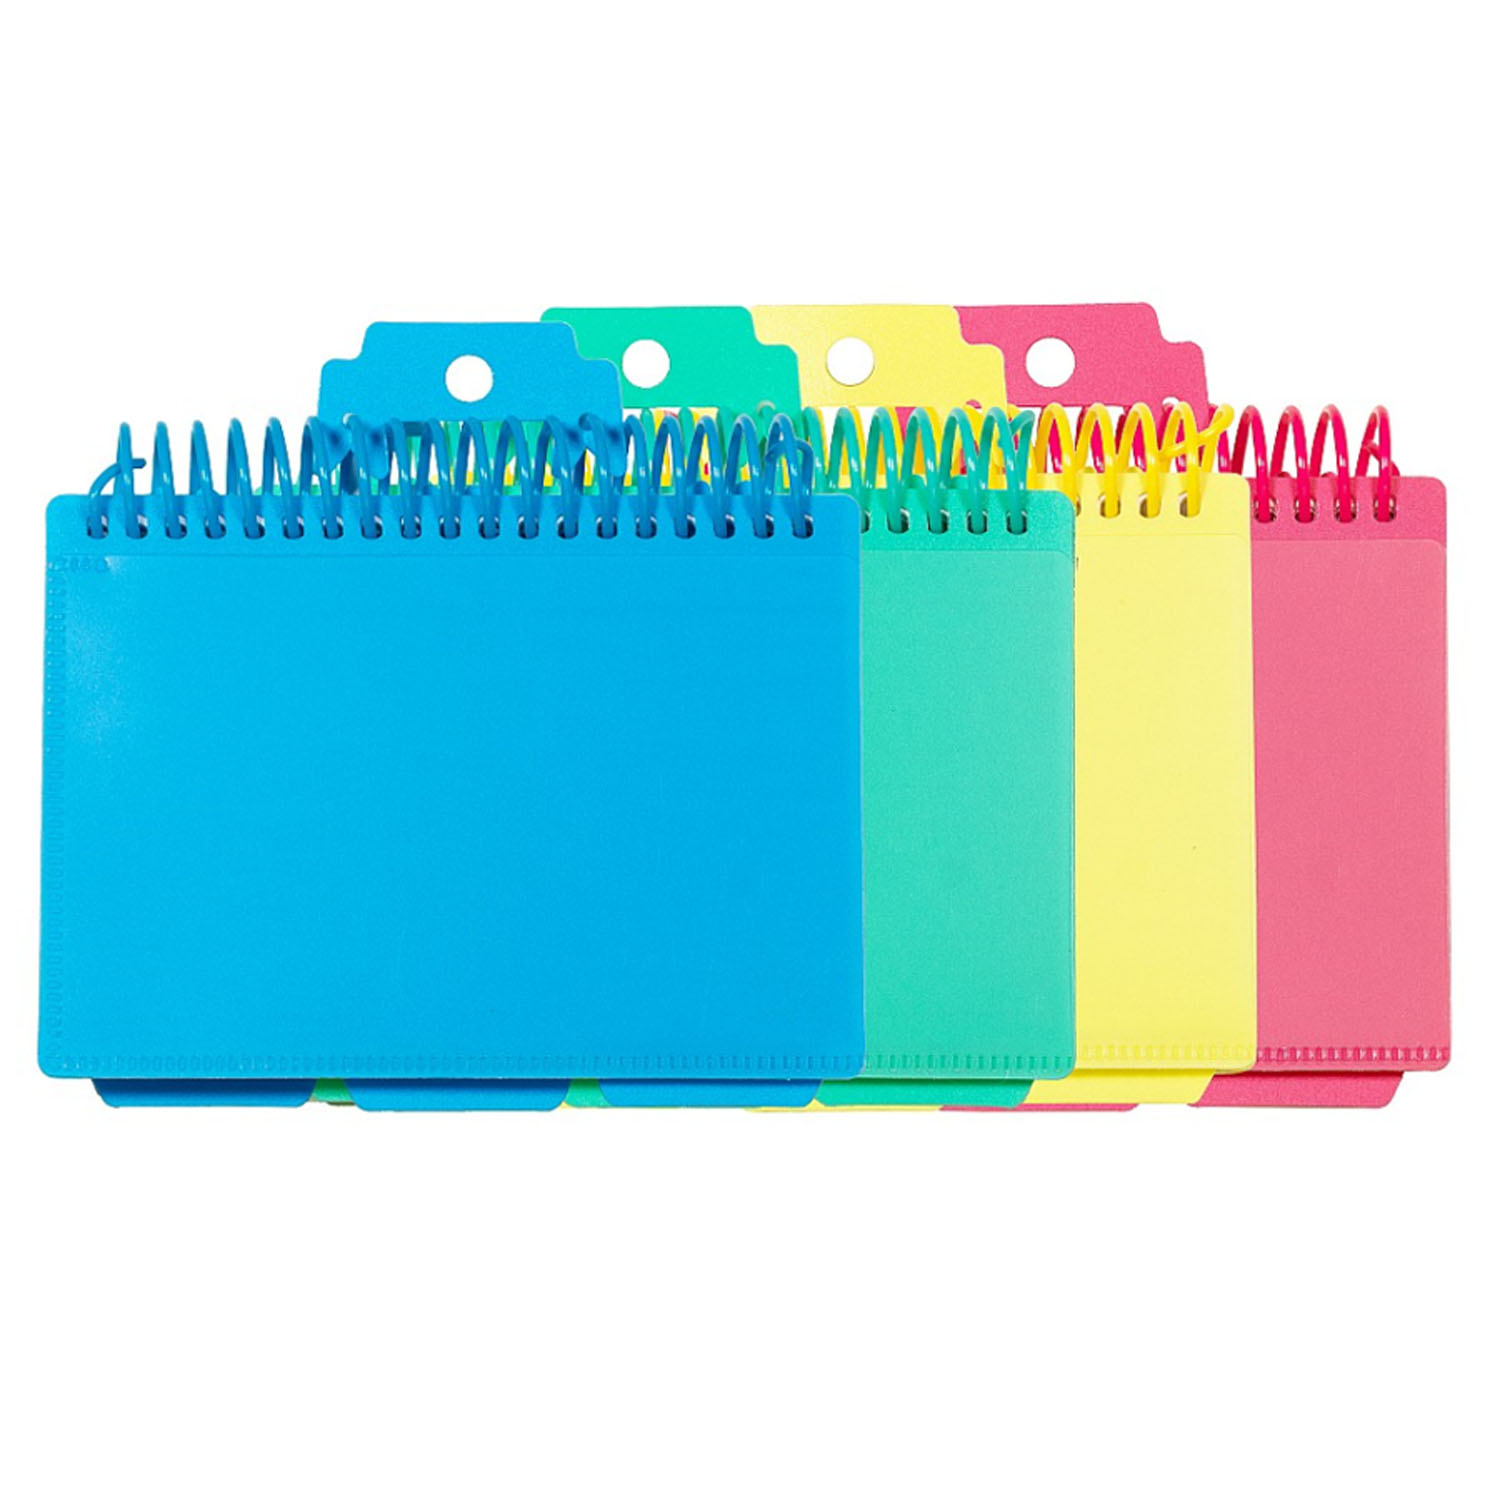 Spiral Bound Index Card Notebook with Index Tabs, Assorted Tropic Tones Colors, 1 Each